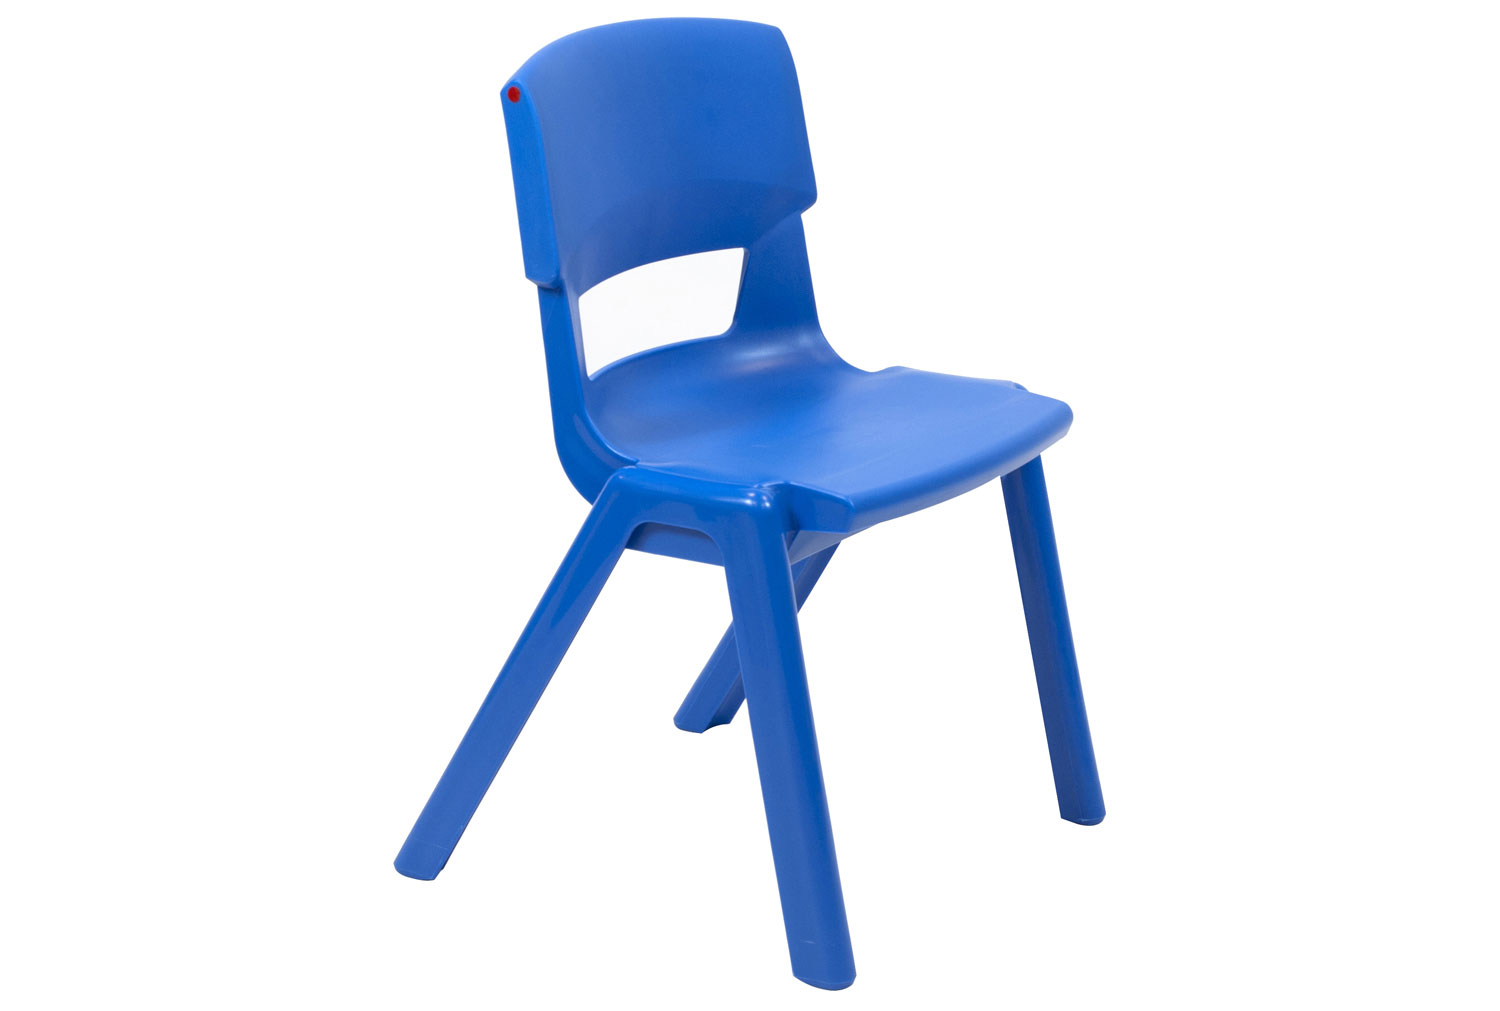 Qty 10 - Postura+ Classroom Chair, 8-11 Years - 34wx31dx38h (cm), Ink Blue